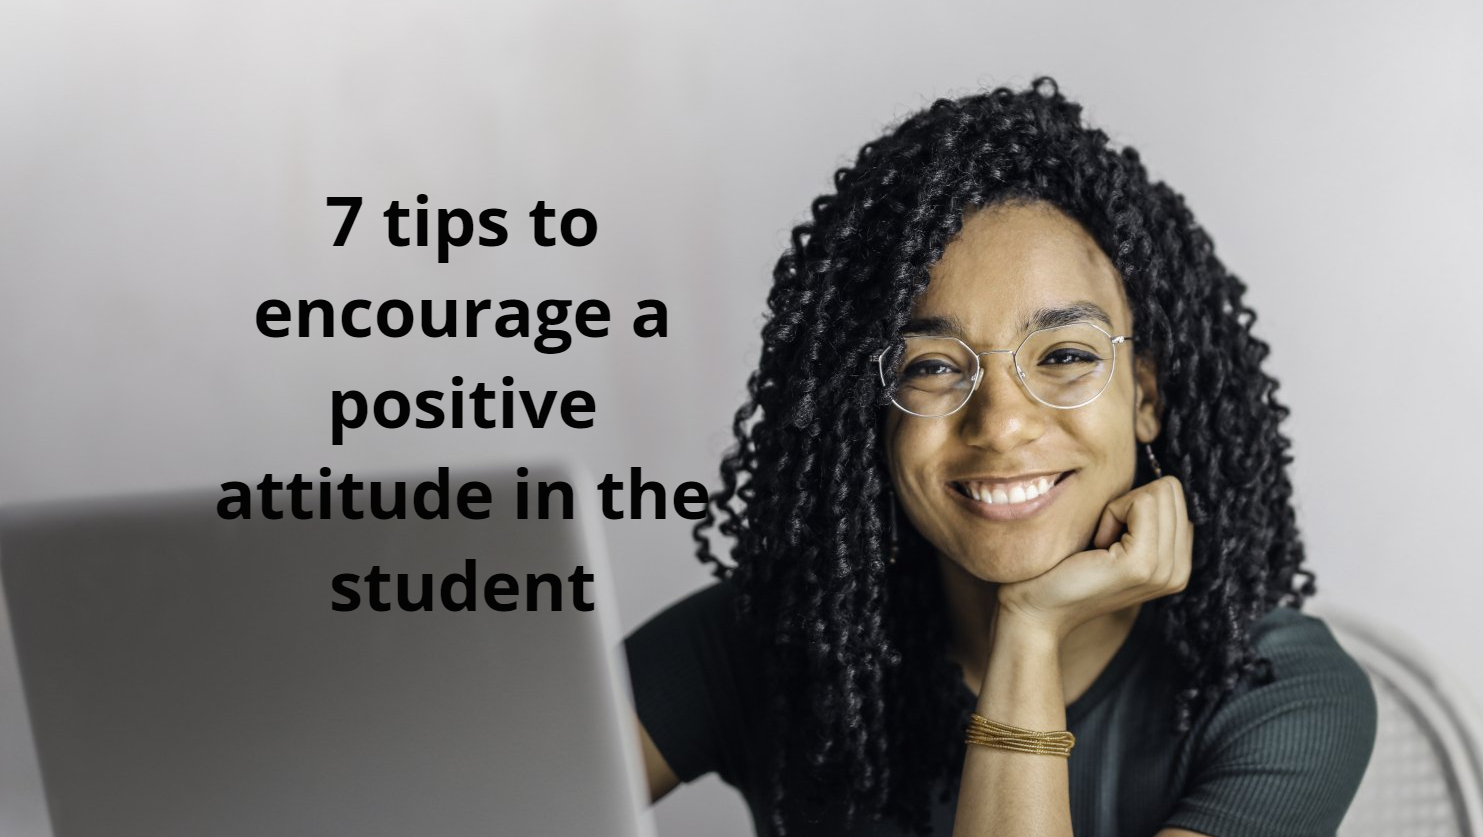 5 tips to encourage a positive attitude in the student